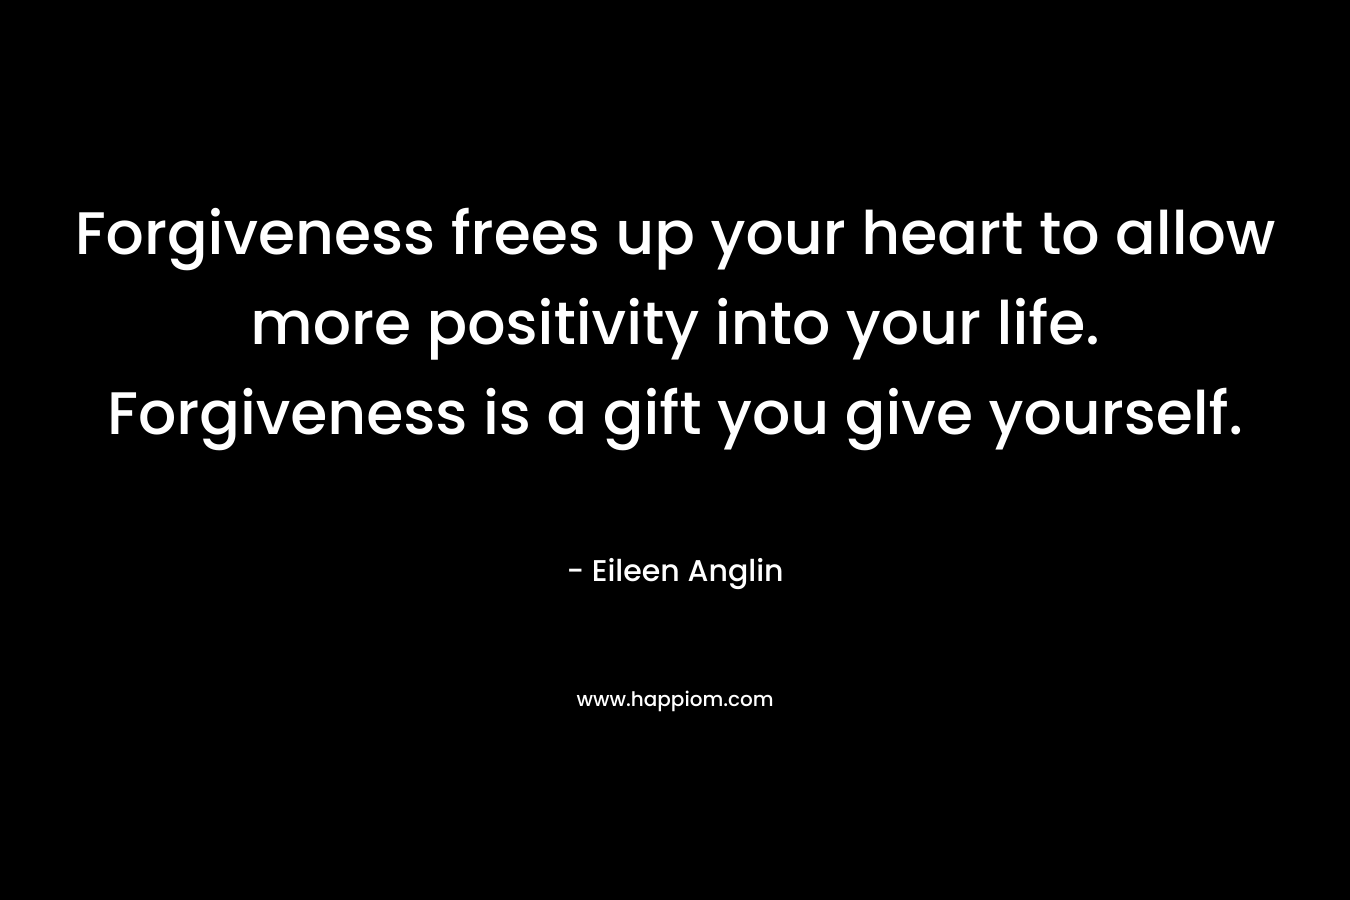 Forgiveness frees up your heart to allow more positivity into your life. Forgiveness is a gift you give yourself.